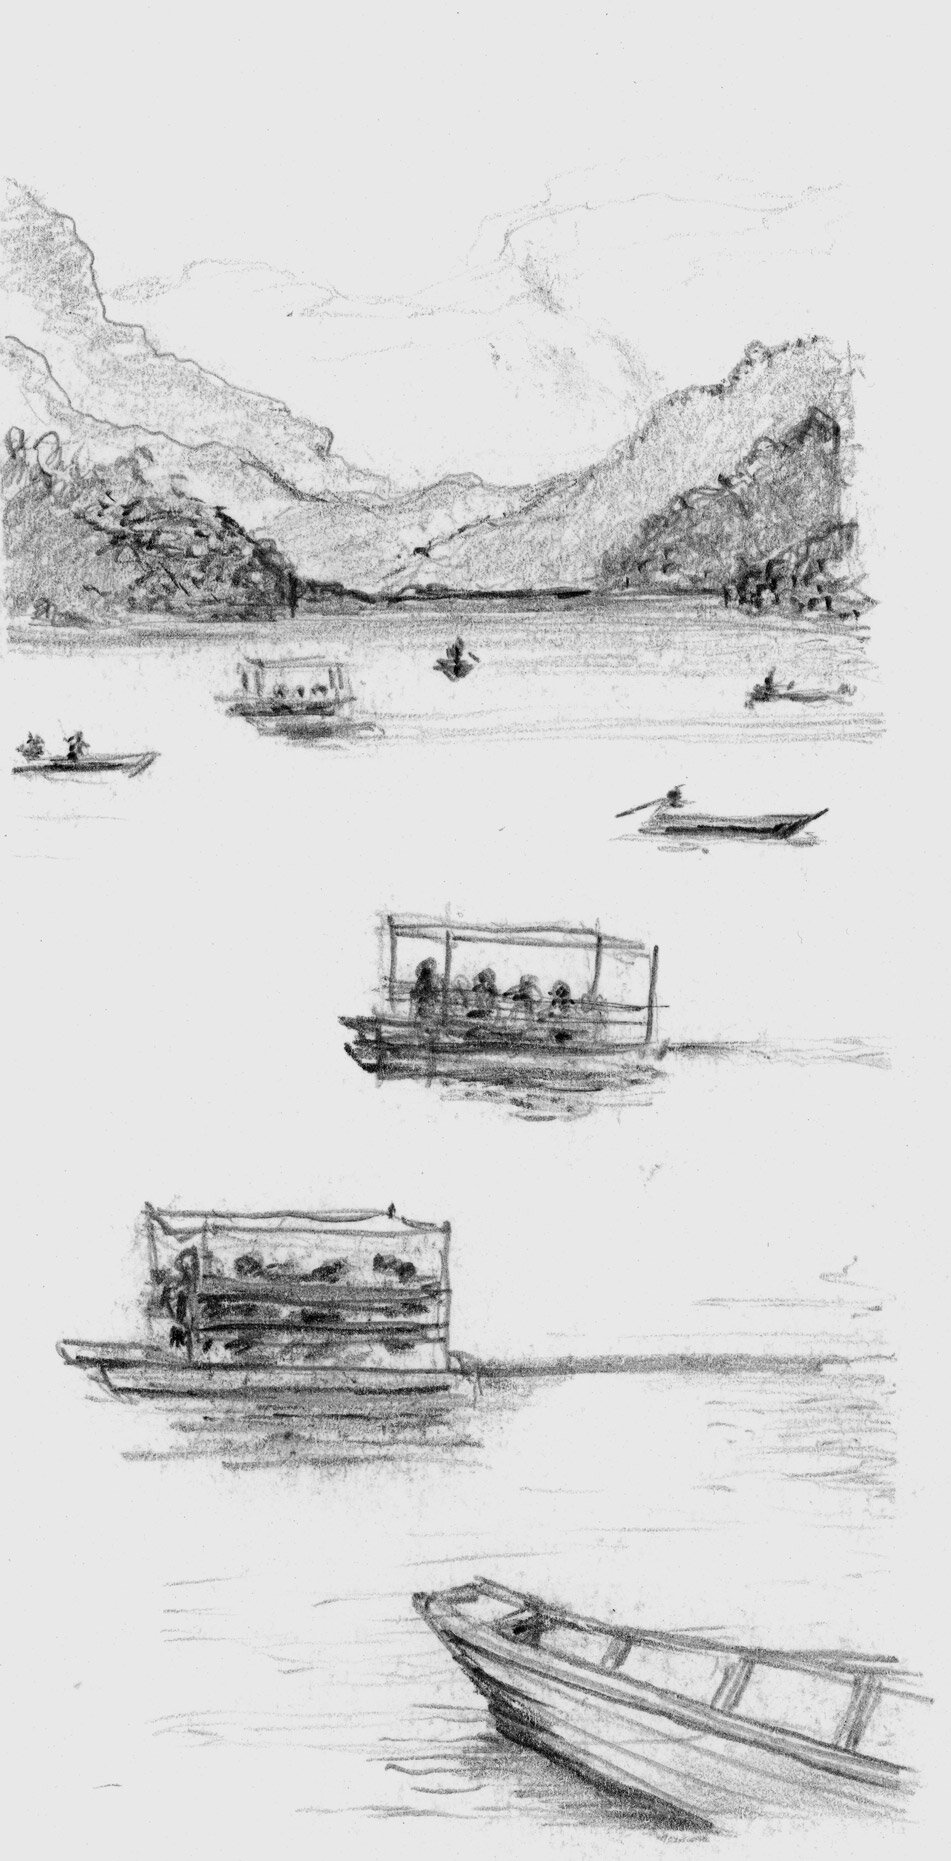   Pokhara Lake Boating Nepal  2013 Pencil on paper 7x5 inches 